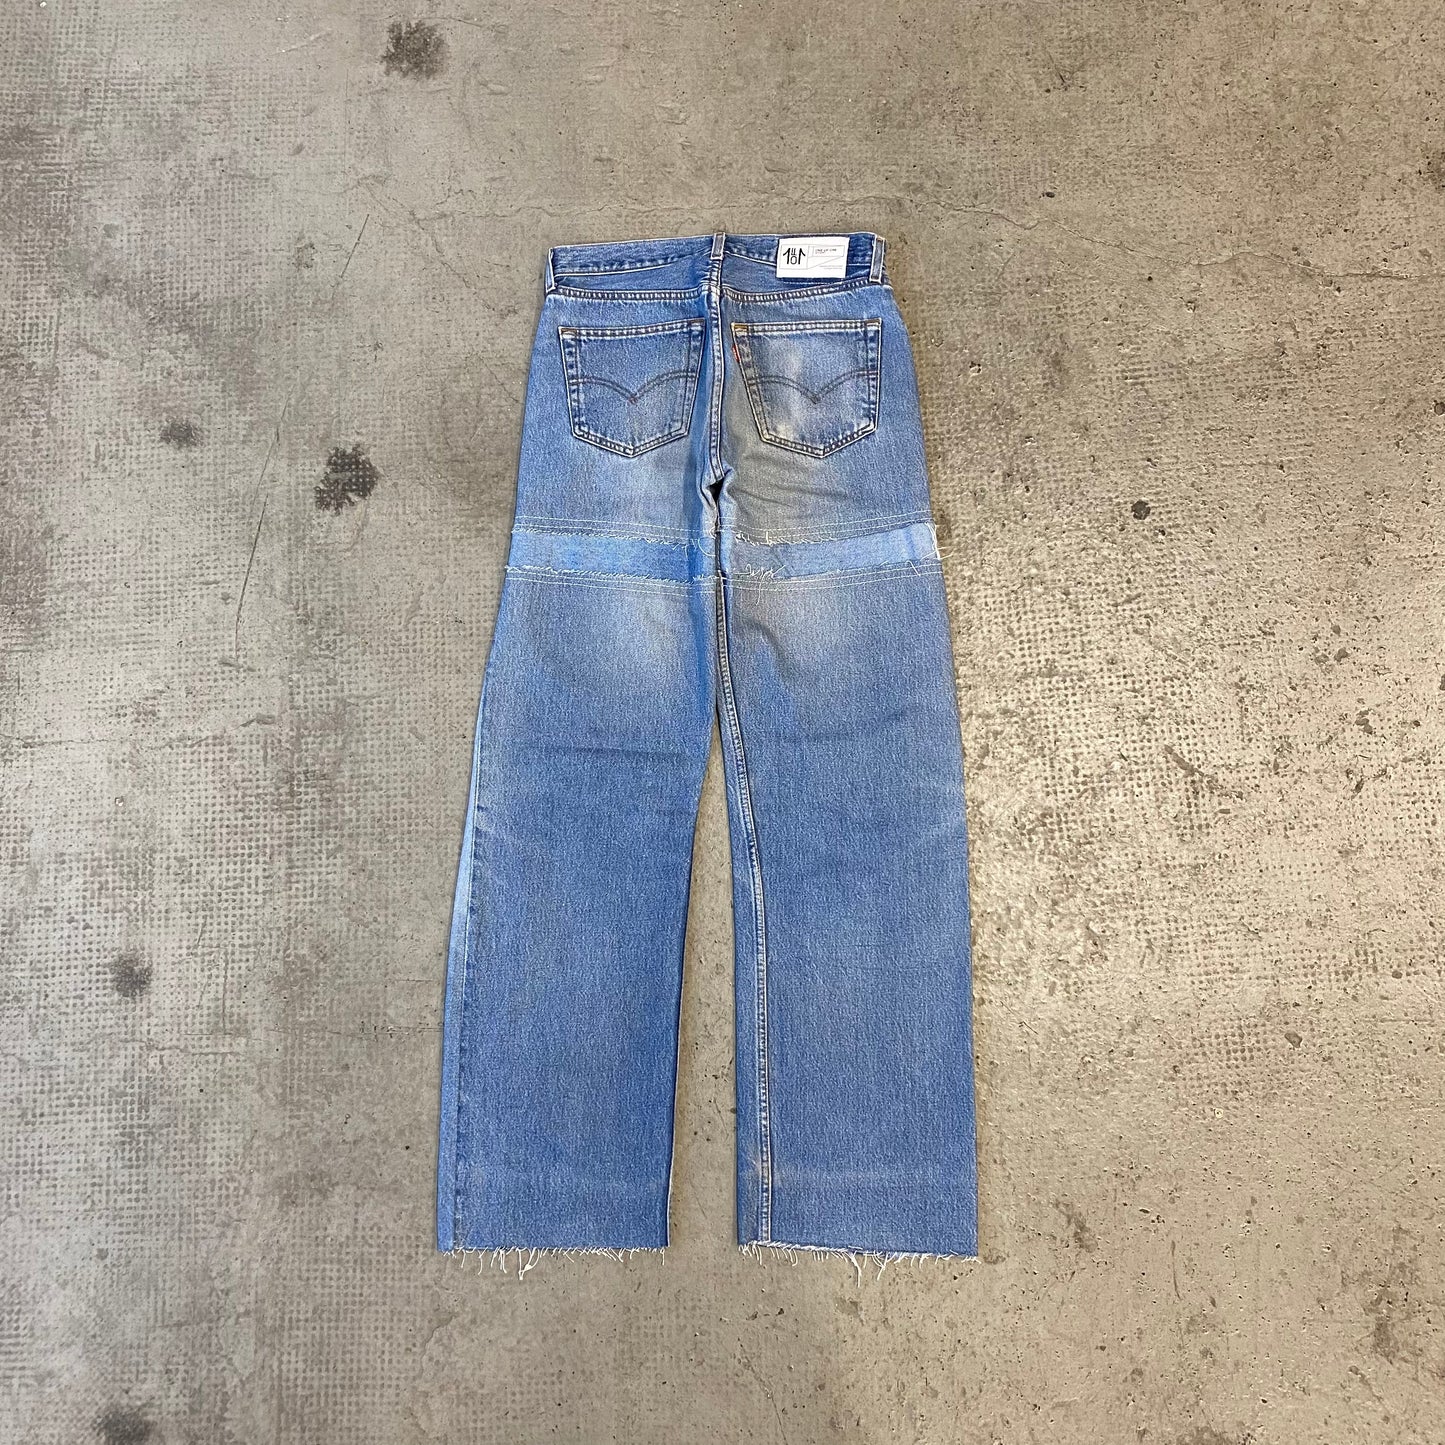 LEVI'S EXAGGERATED FADED BLUE